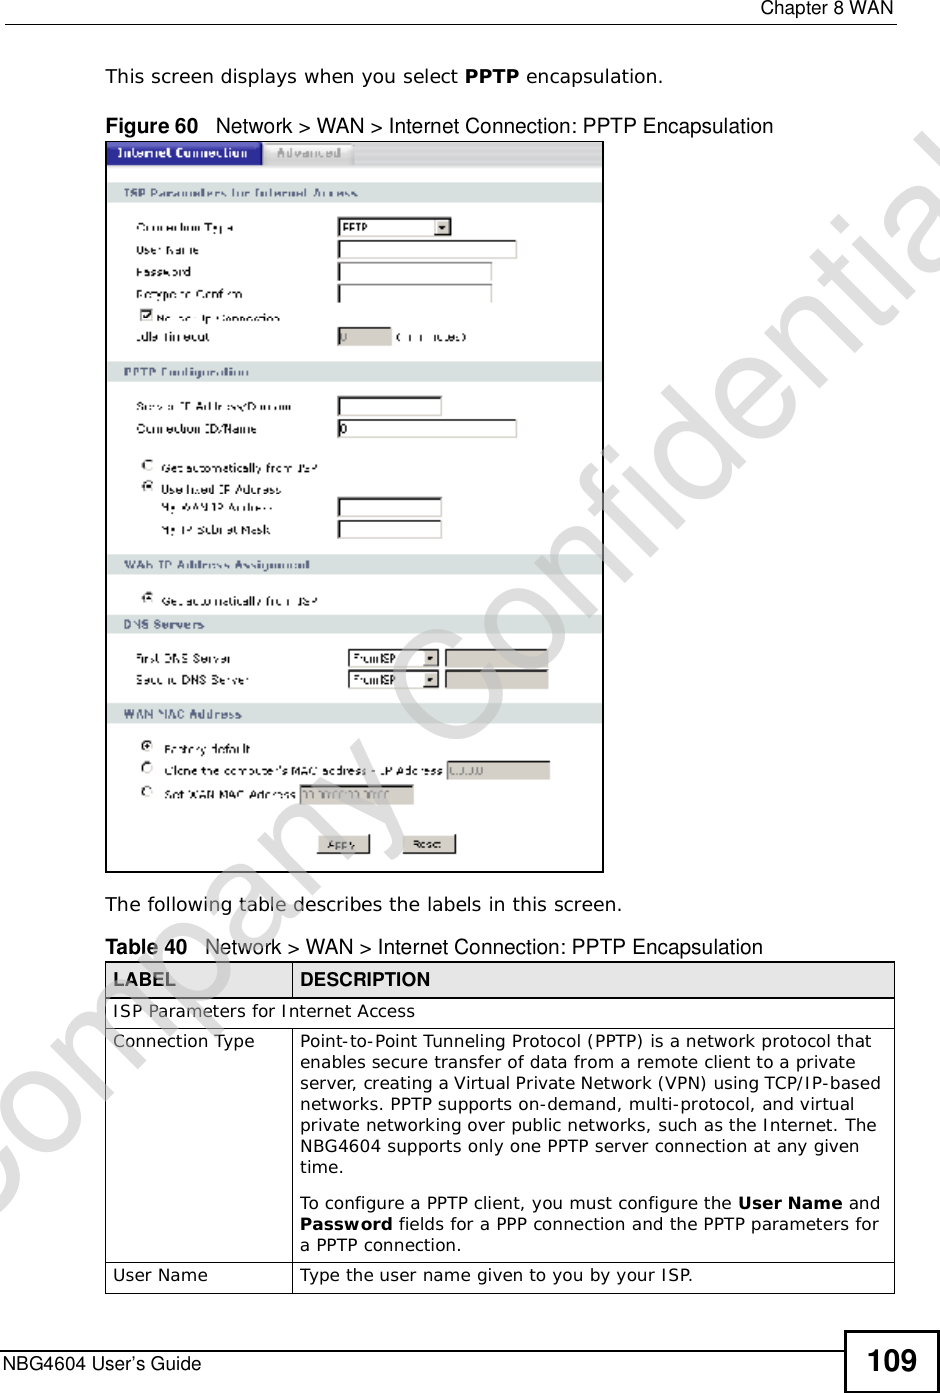  Chapter 8WANNBG4604 User’s Guide 109This screen displays when you select PPTP encapsulation.Figure 60   Network &gt; WAN &gt; Internet Connection: PPTP EncapsulationThe following table describes the labels in this screen.Table 40   Network &gt; WAN &gt; Internet Connection: PPTP EncapsulationLABEL DESCRIPTIONISP Parameters for Internet AccessConnection Type Point-to-Point Tunneling Protocol (PPTP) is a network protocol that enables secure transfer of data from a remote client to a private server, creating a Virtual Private Network (VPN) using TCP/IP-based networks. PPTP supports on-demand, multi-protocol, and virtual private networking over public networks, such as the Internet. The NBG4604 supports only one PPTP server connection at any given time.To configure a PPTP client, you must configure the User Name and Password fields for a PPP connection and the PPTP parameters for a PPTP connection.User Name Type the user name given to you by your ISP. Company Confidential